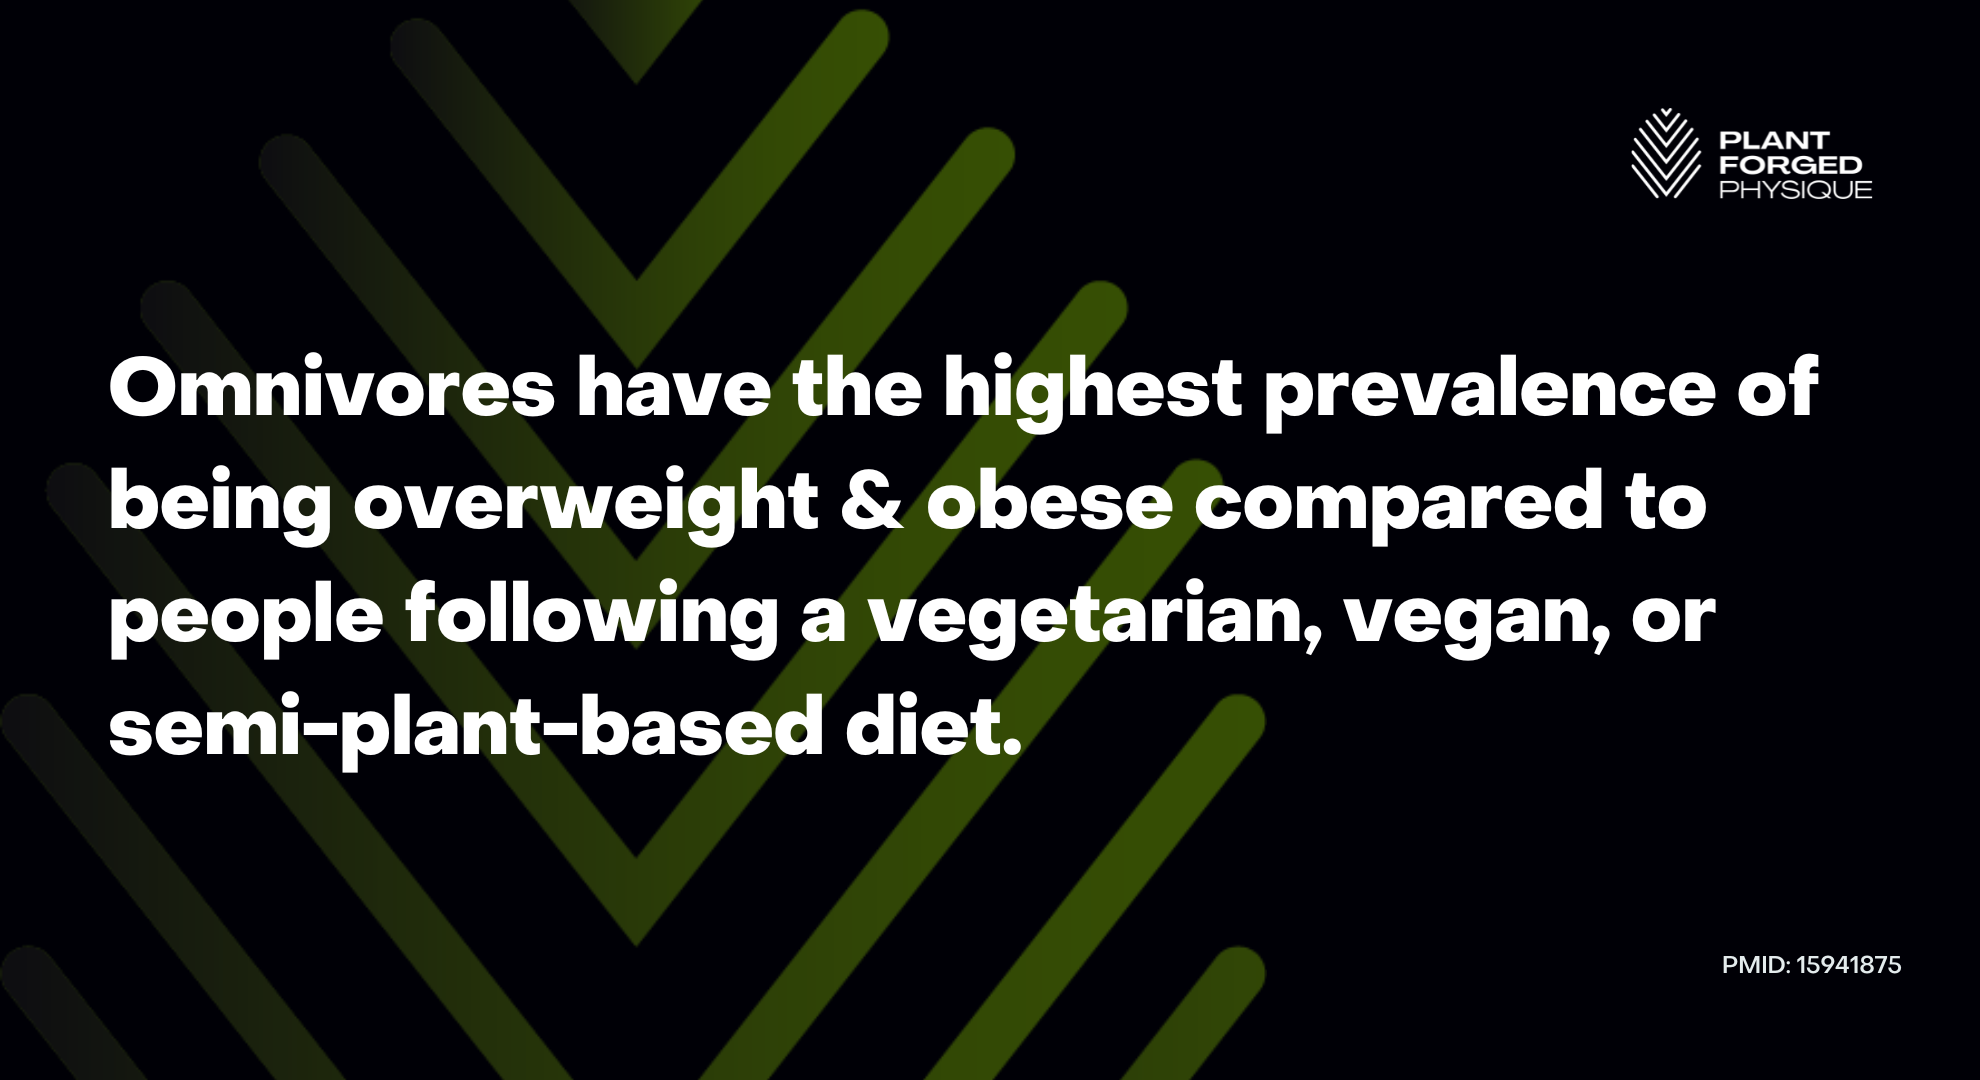 Omnivores have the highest prevalence of being overweight and obese compared to people following a vegetarian, vegan, or semi-plant-based diet.